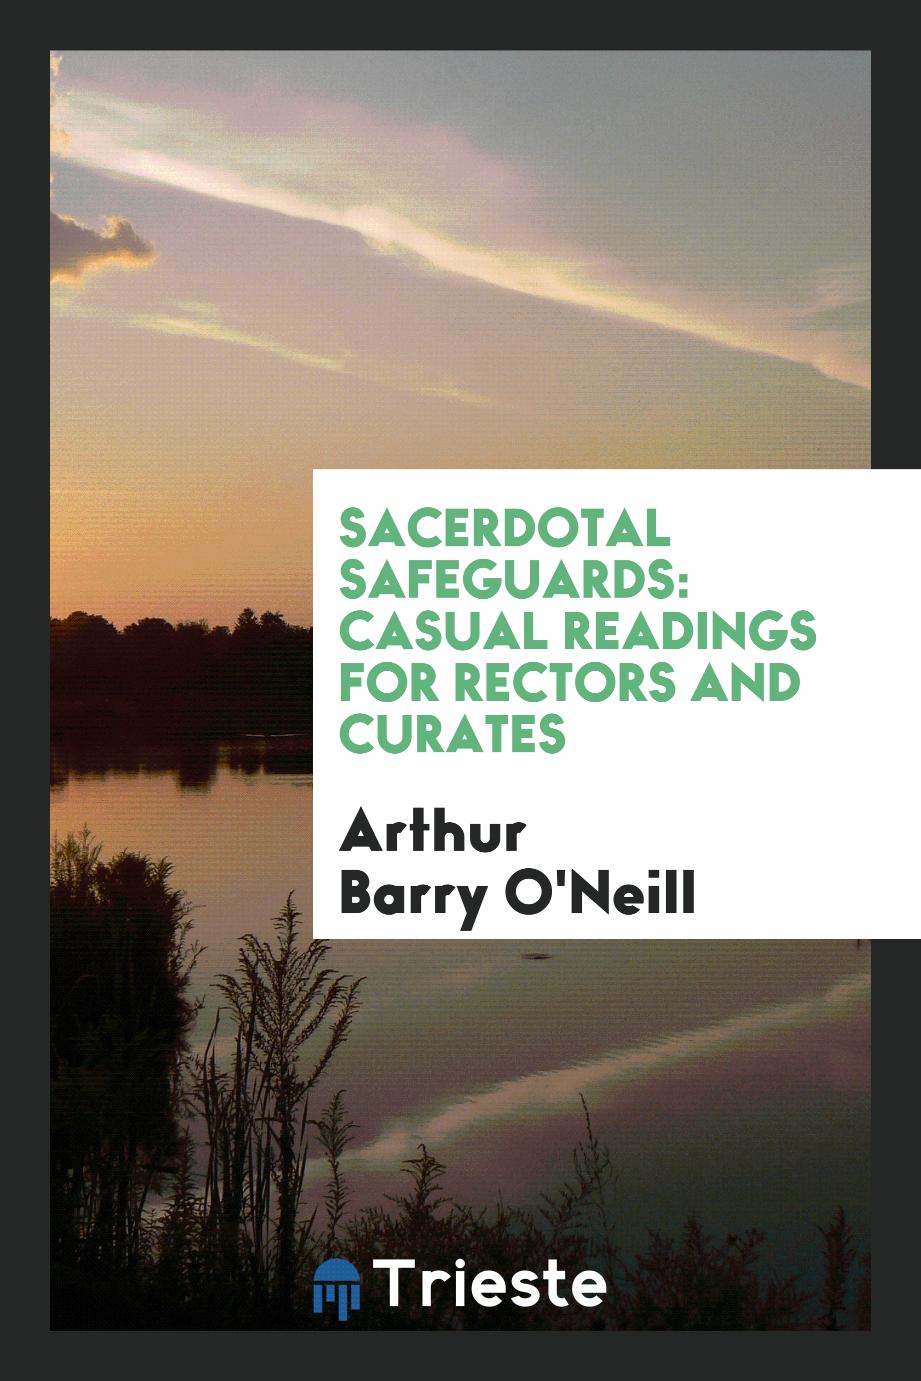 Sacerdotal Safeguards: Casual Readings for Rectors and Curates